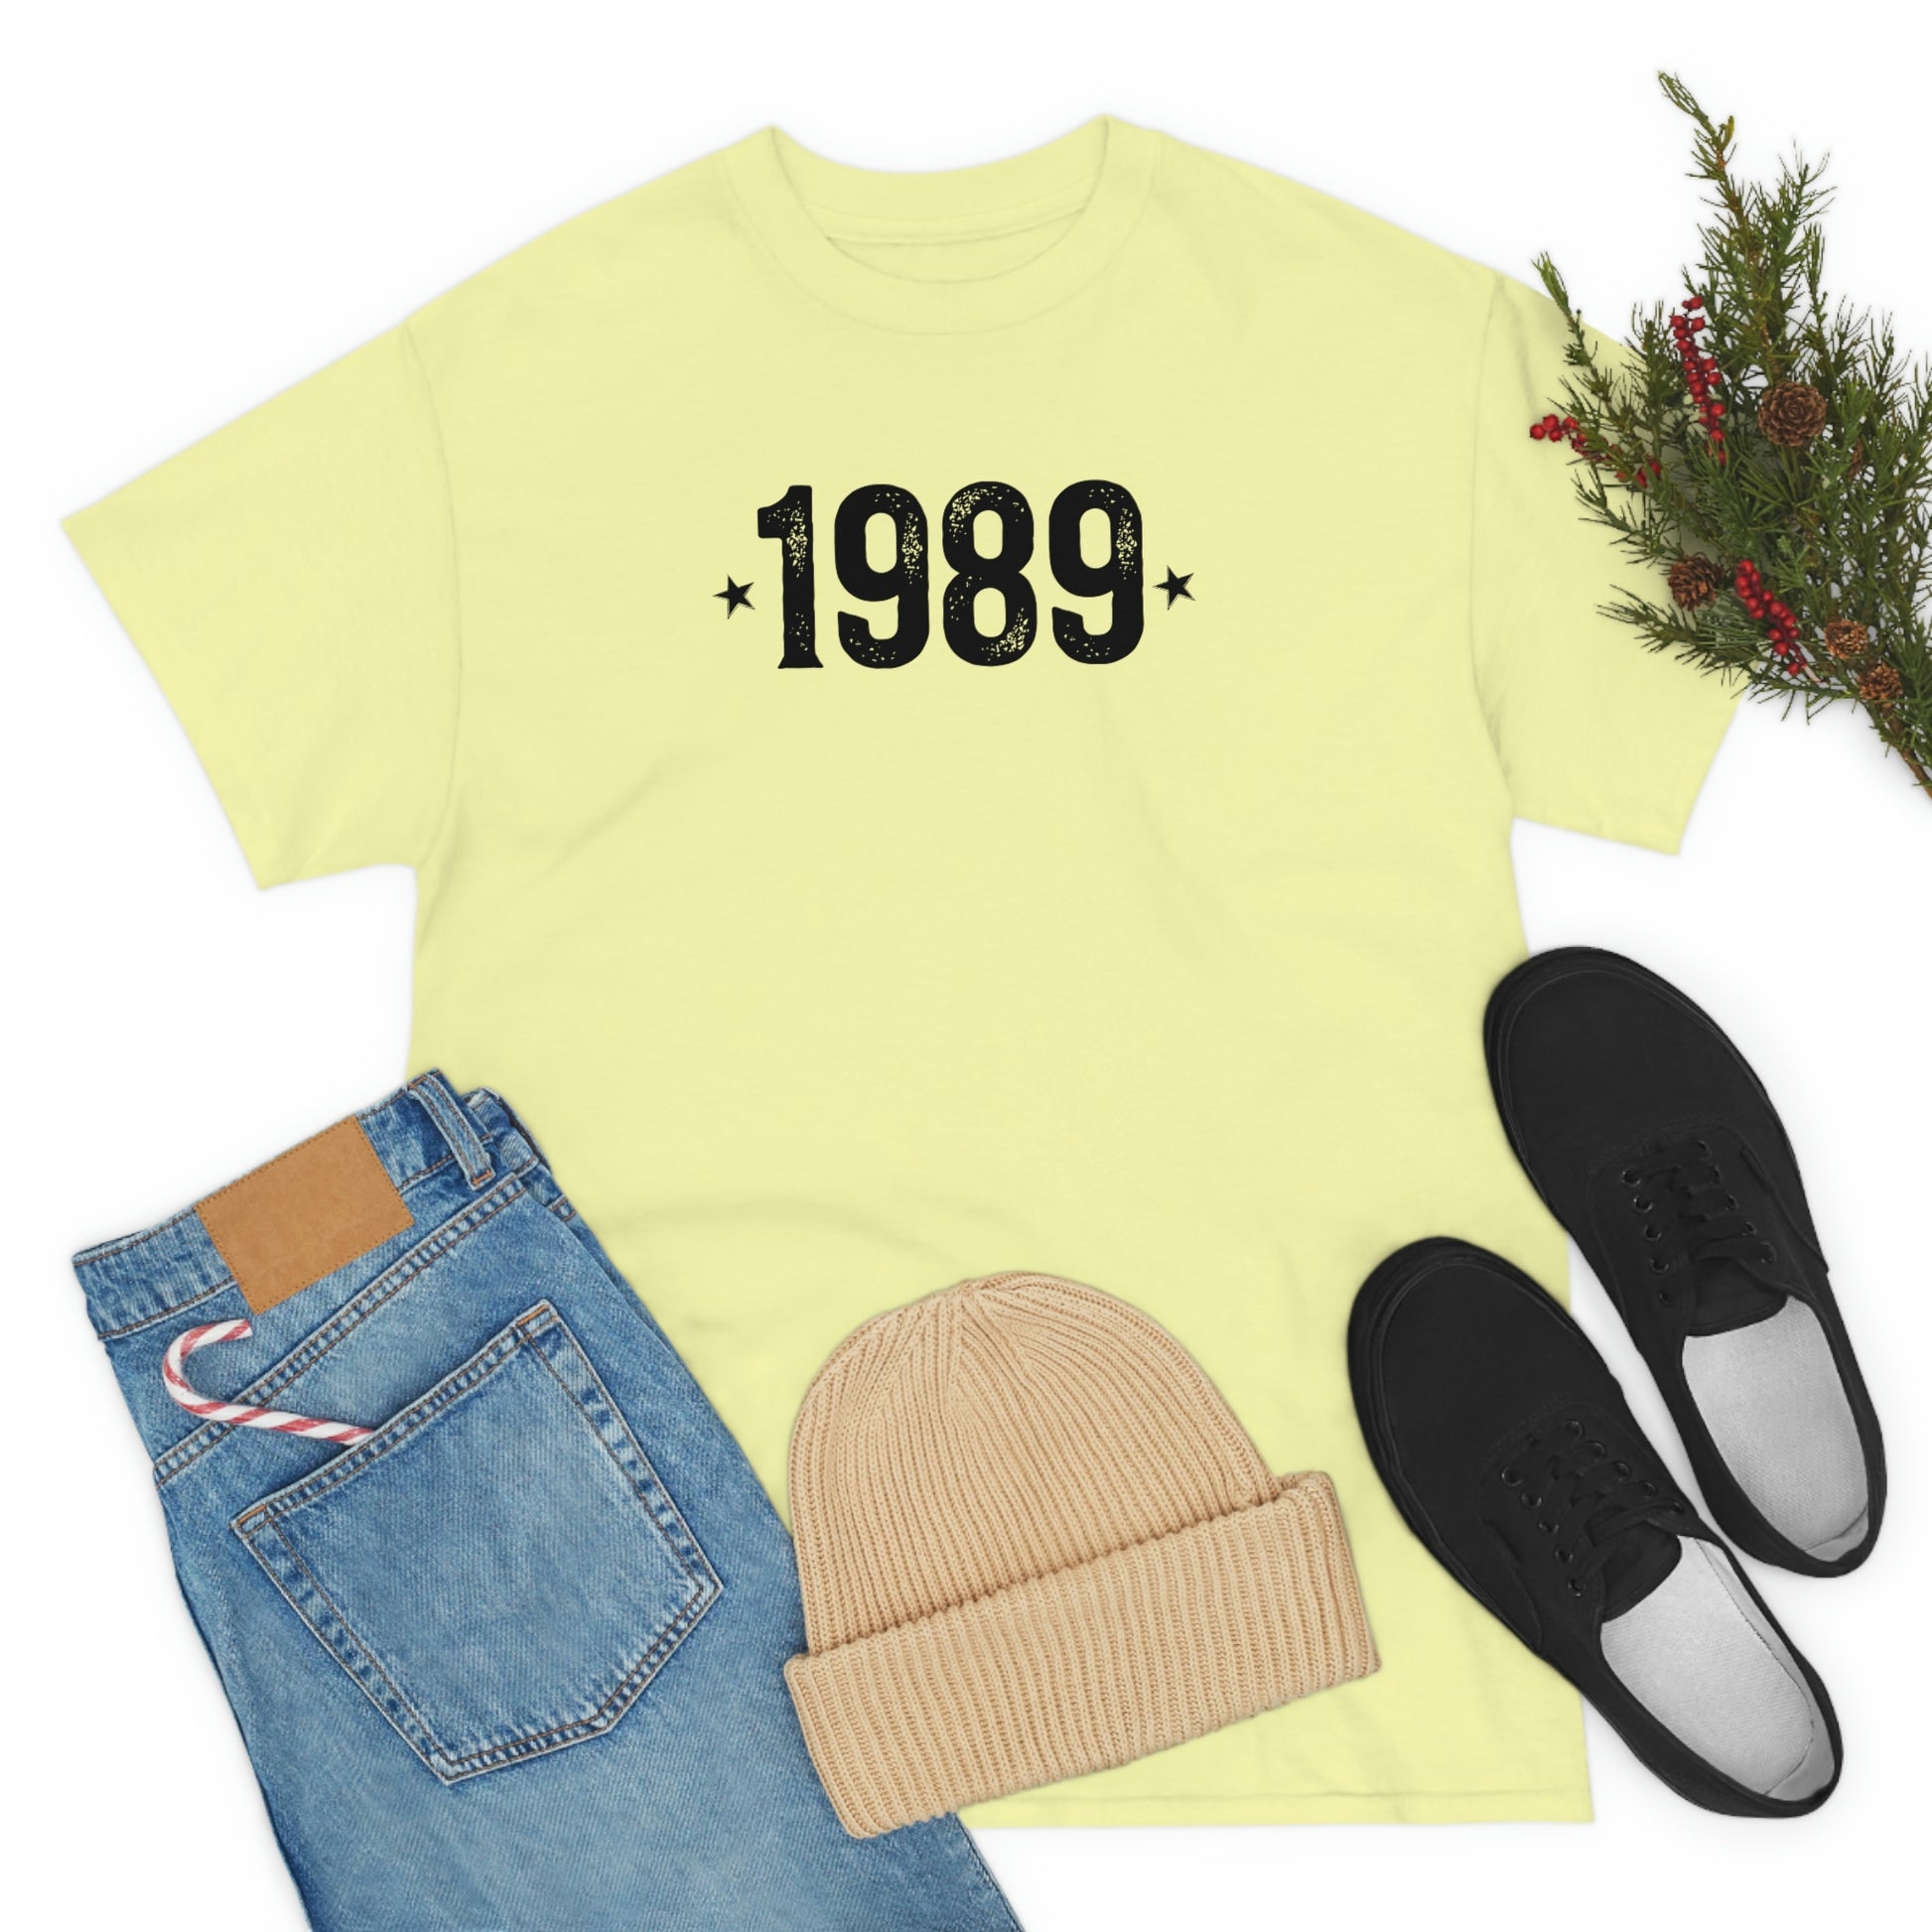 "1989 Birthday Year" T-Shirt - Weave Got Gifts - Unique Gifts You Won’t Find Anywhere Else!